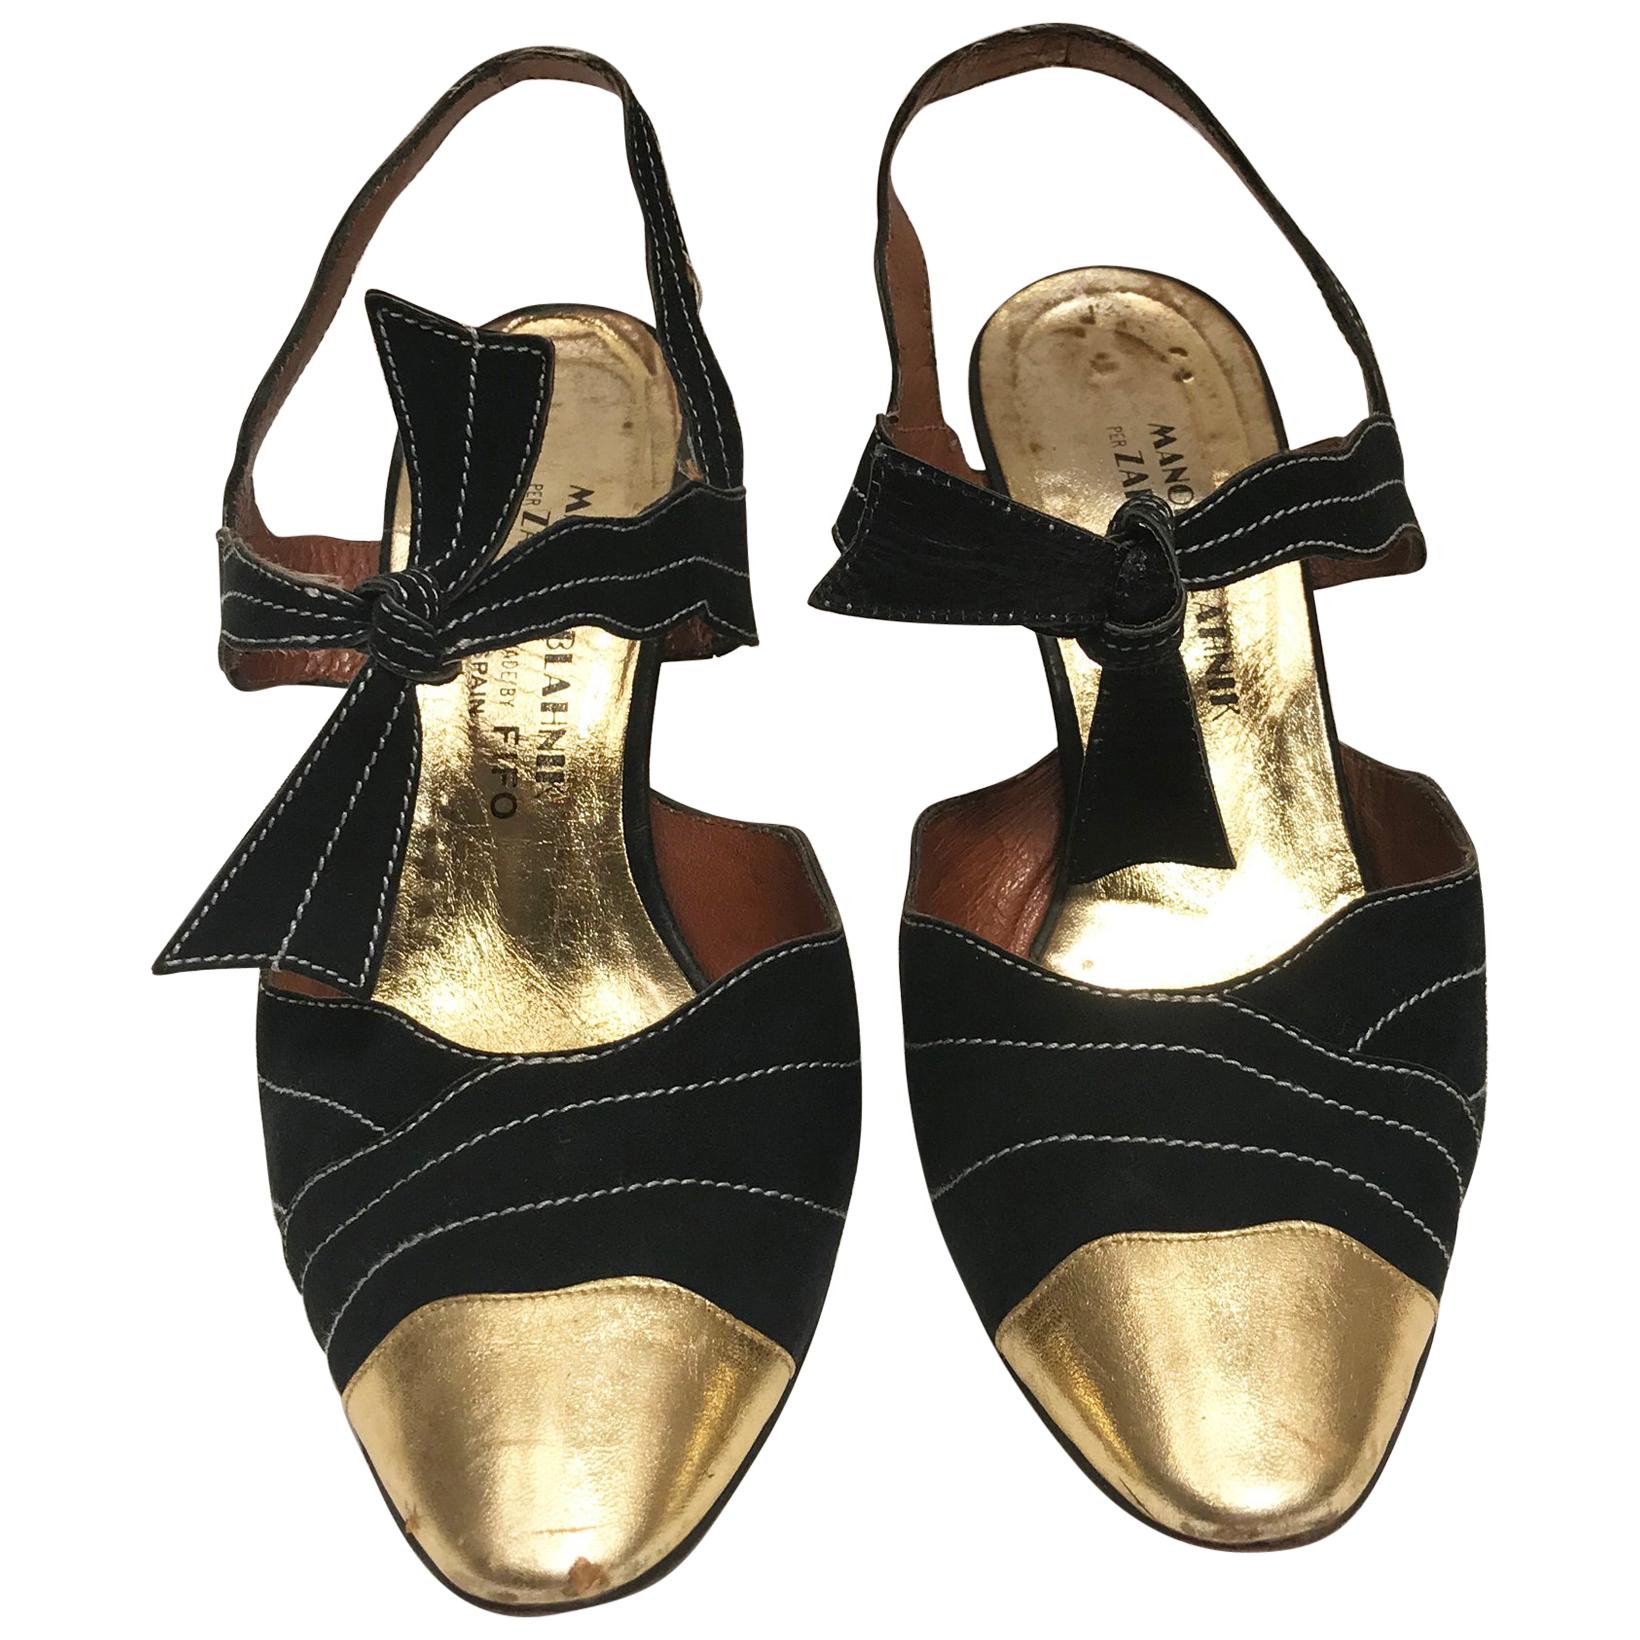 1970's Manolo Blahnik Suede and Gold leather night shoes.